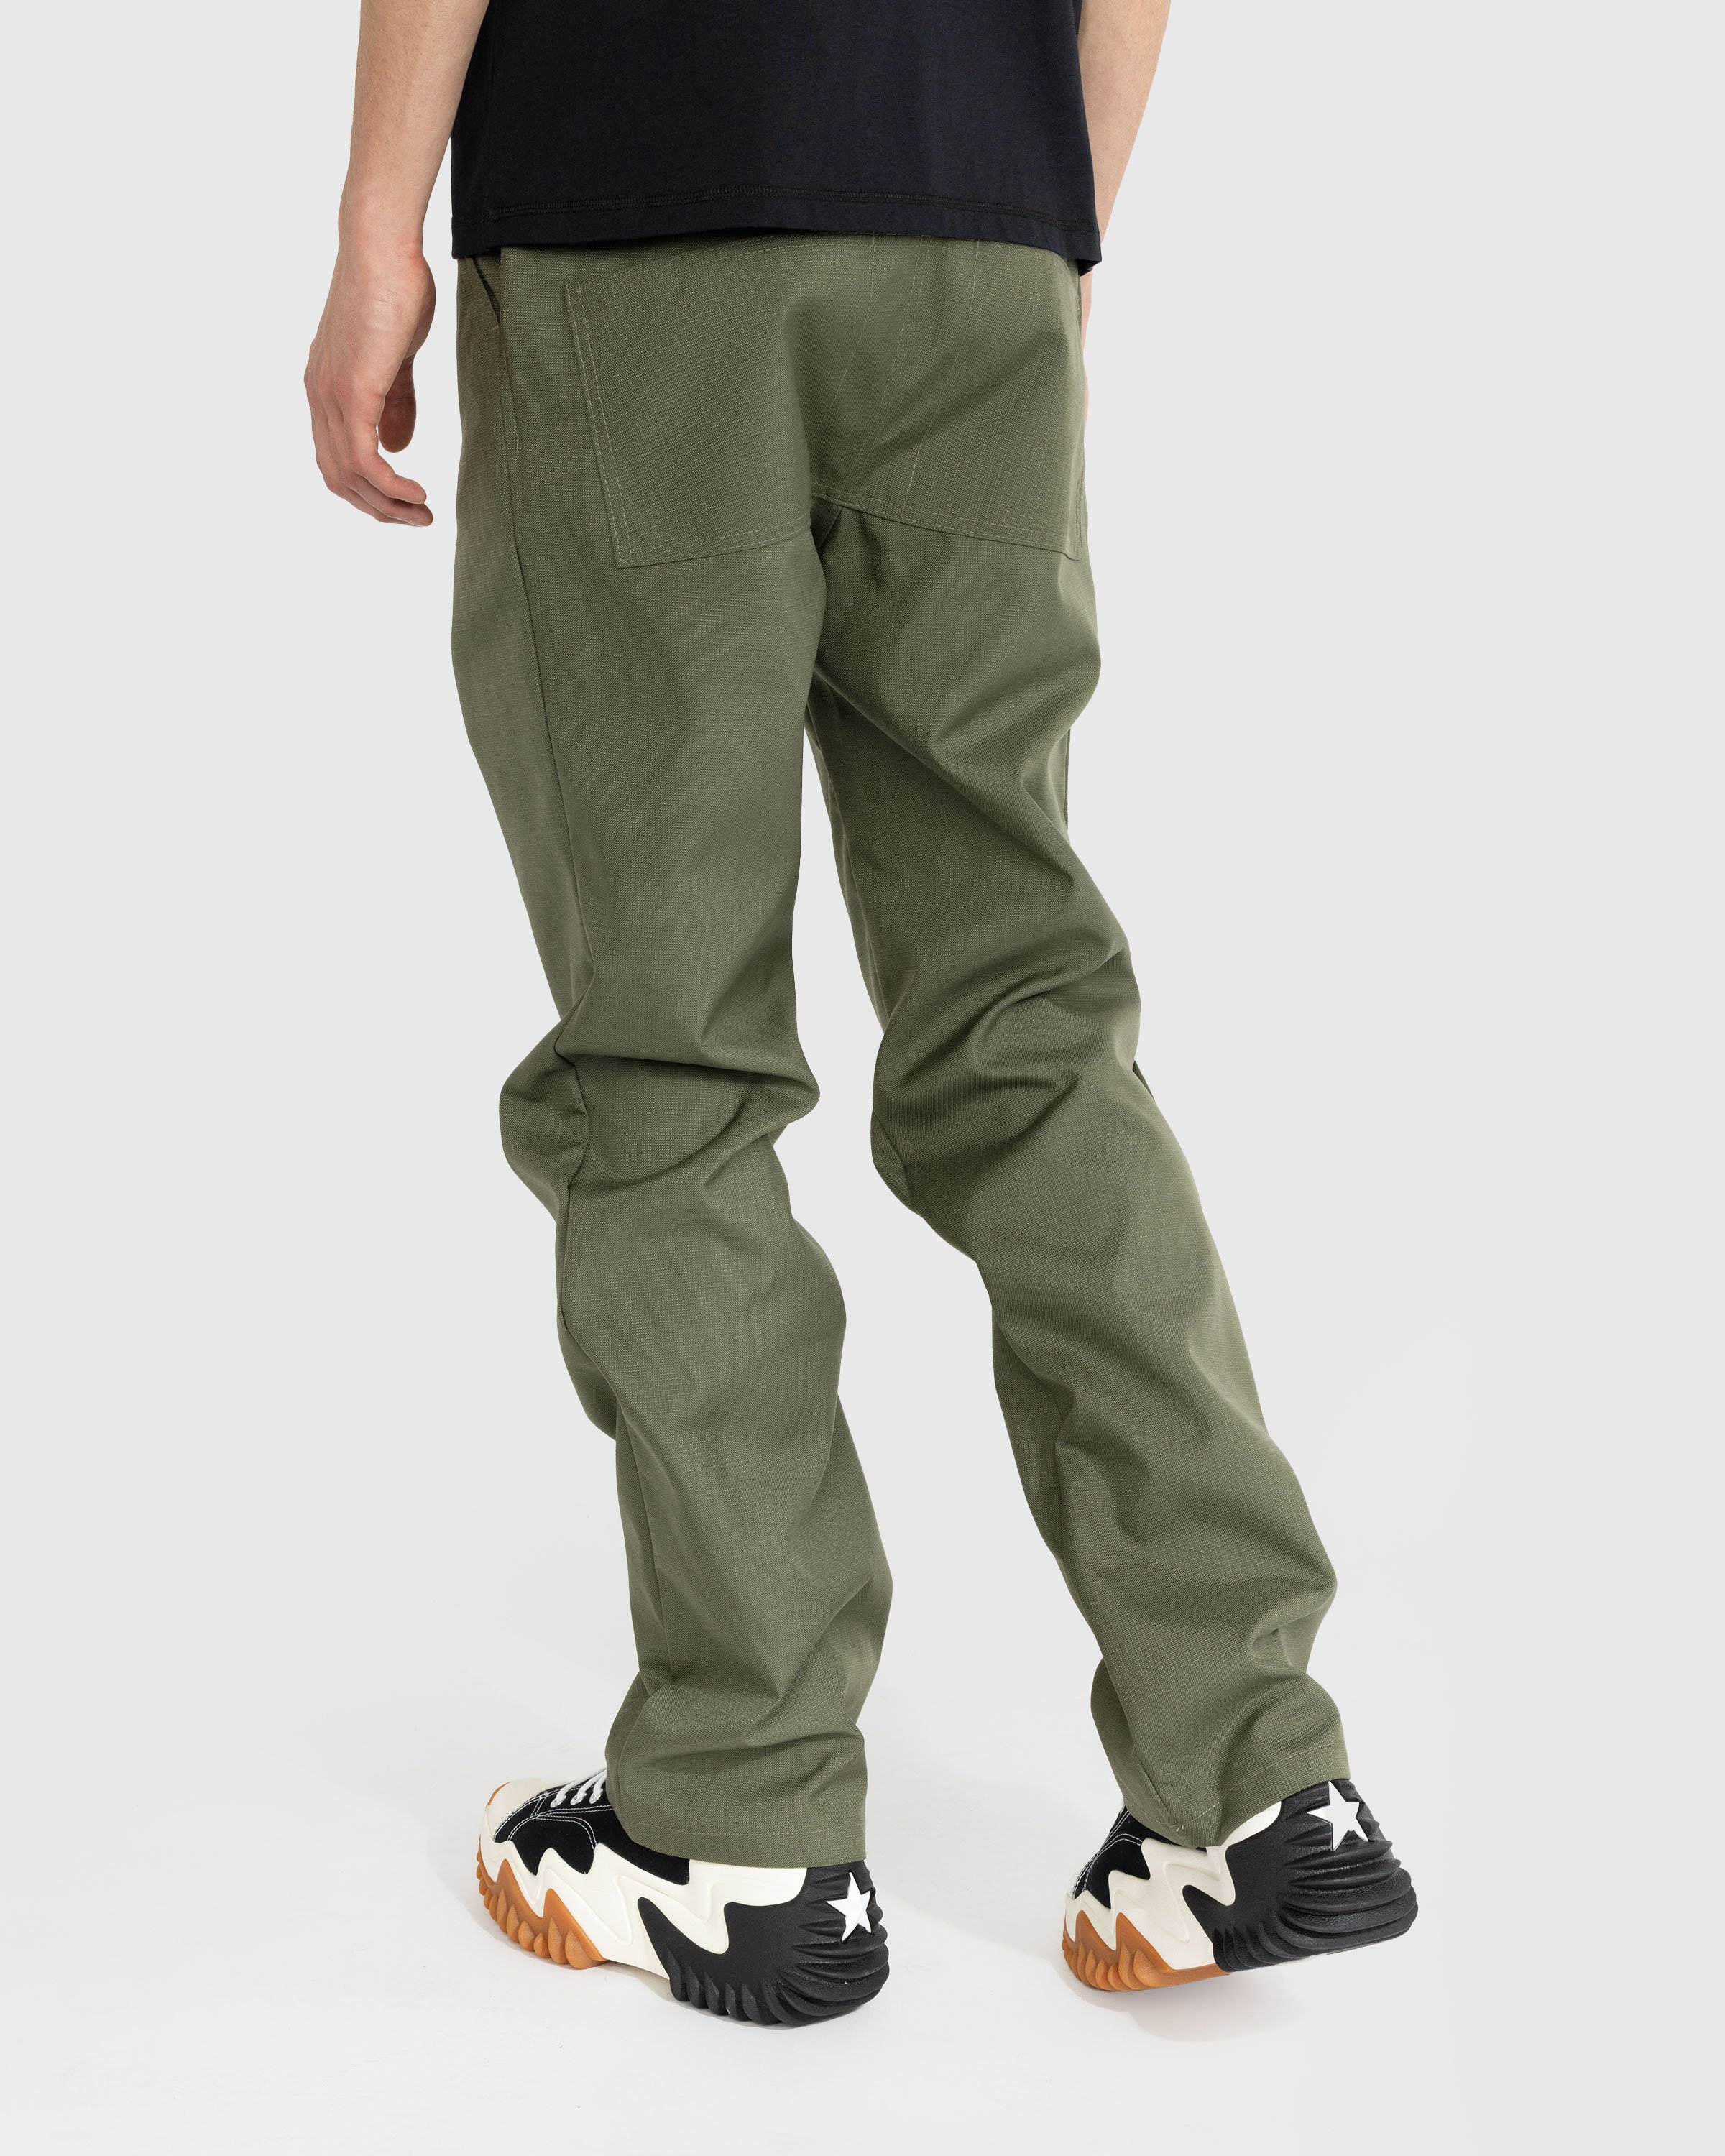 AFFXWRKS - Duty Pant Green - Clothing - Green - Image 3